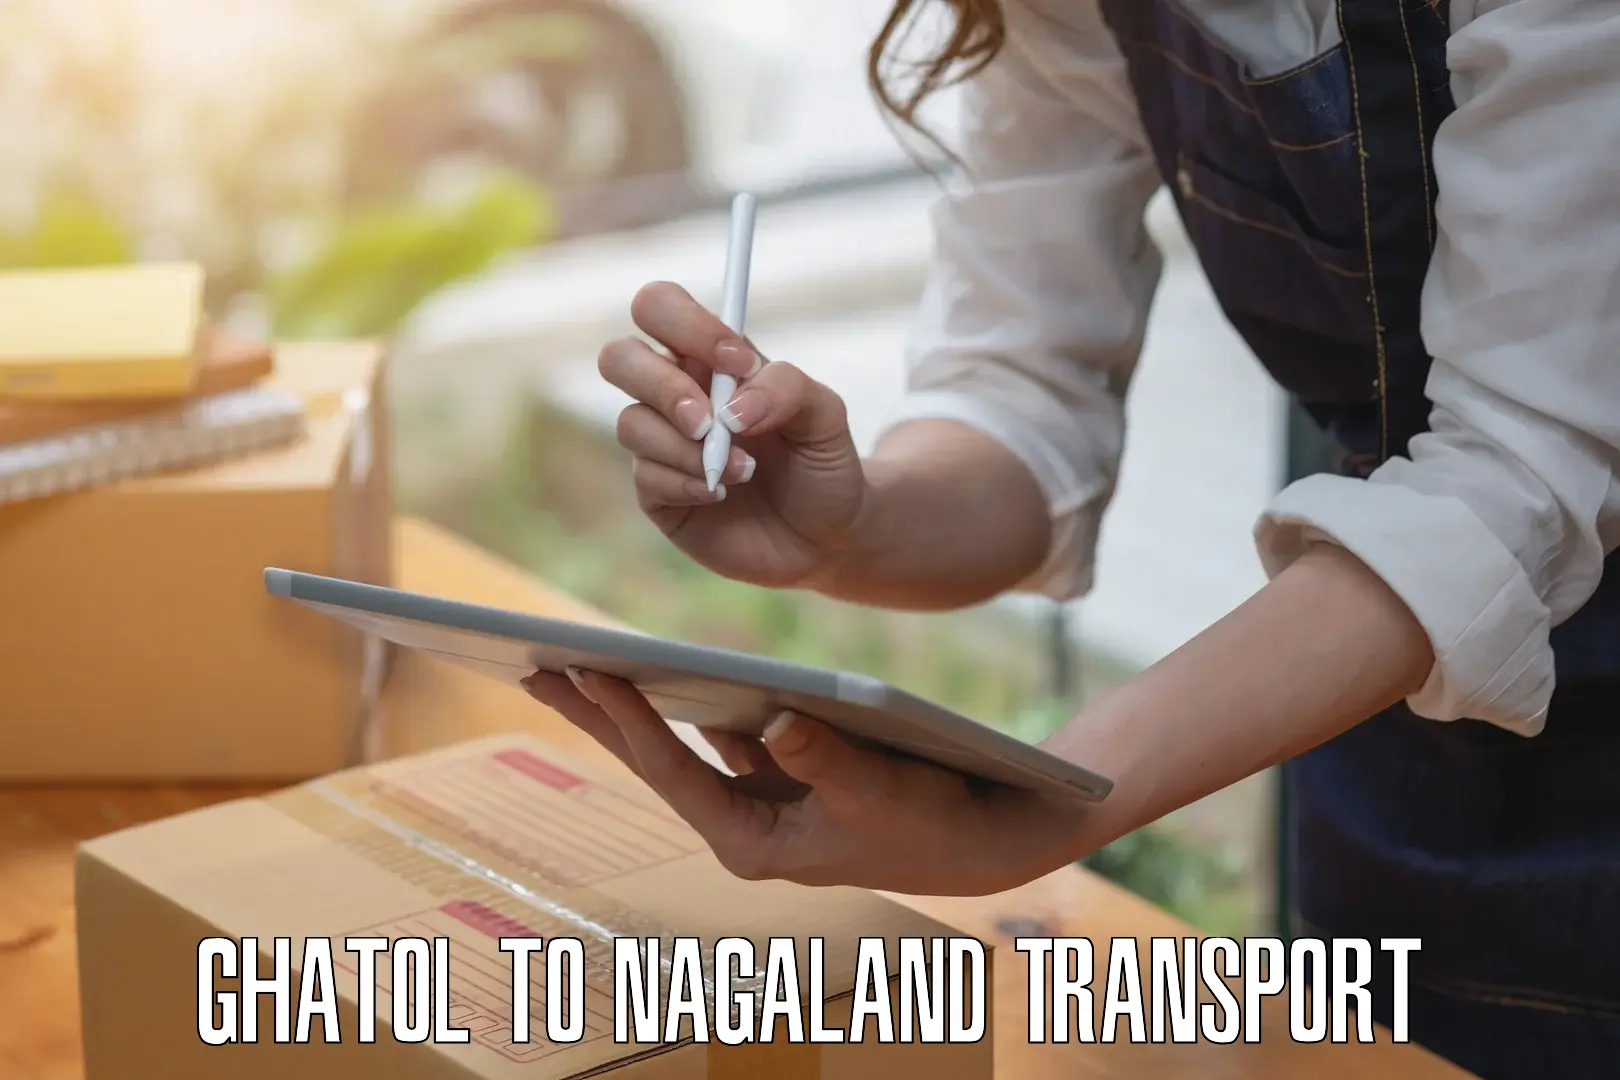 Nationwide transport services Ghatol to Nagaland